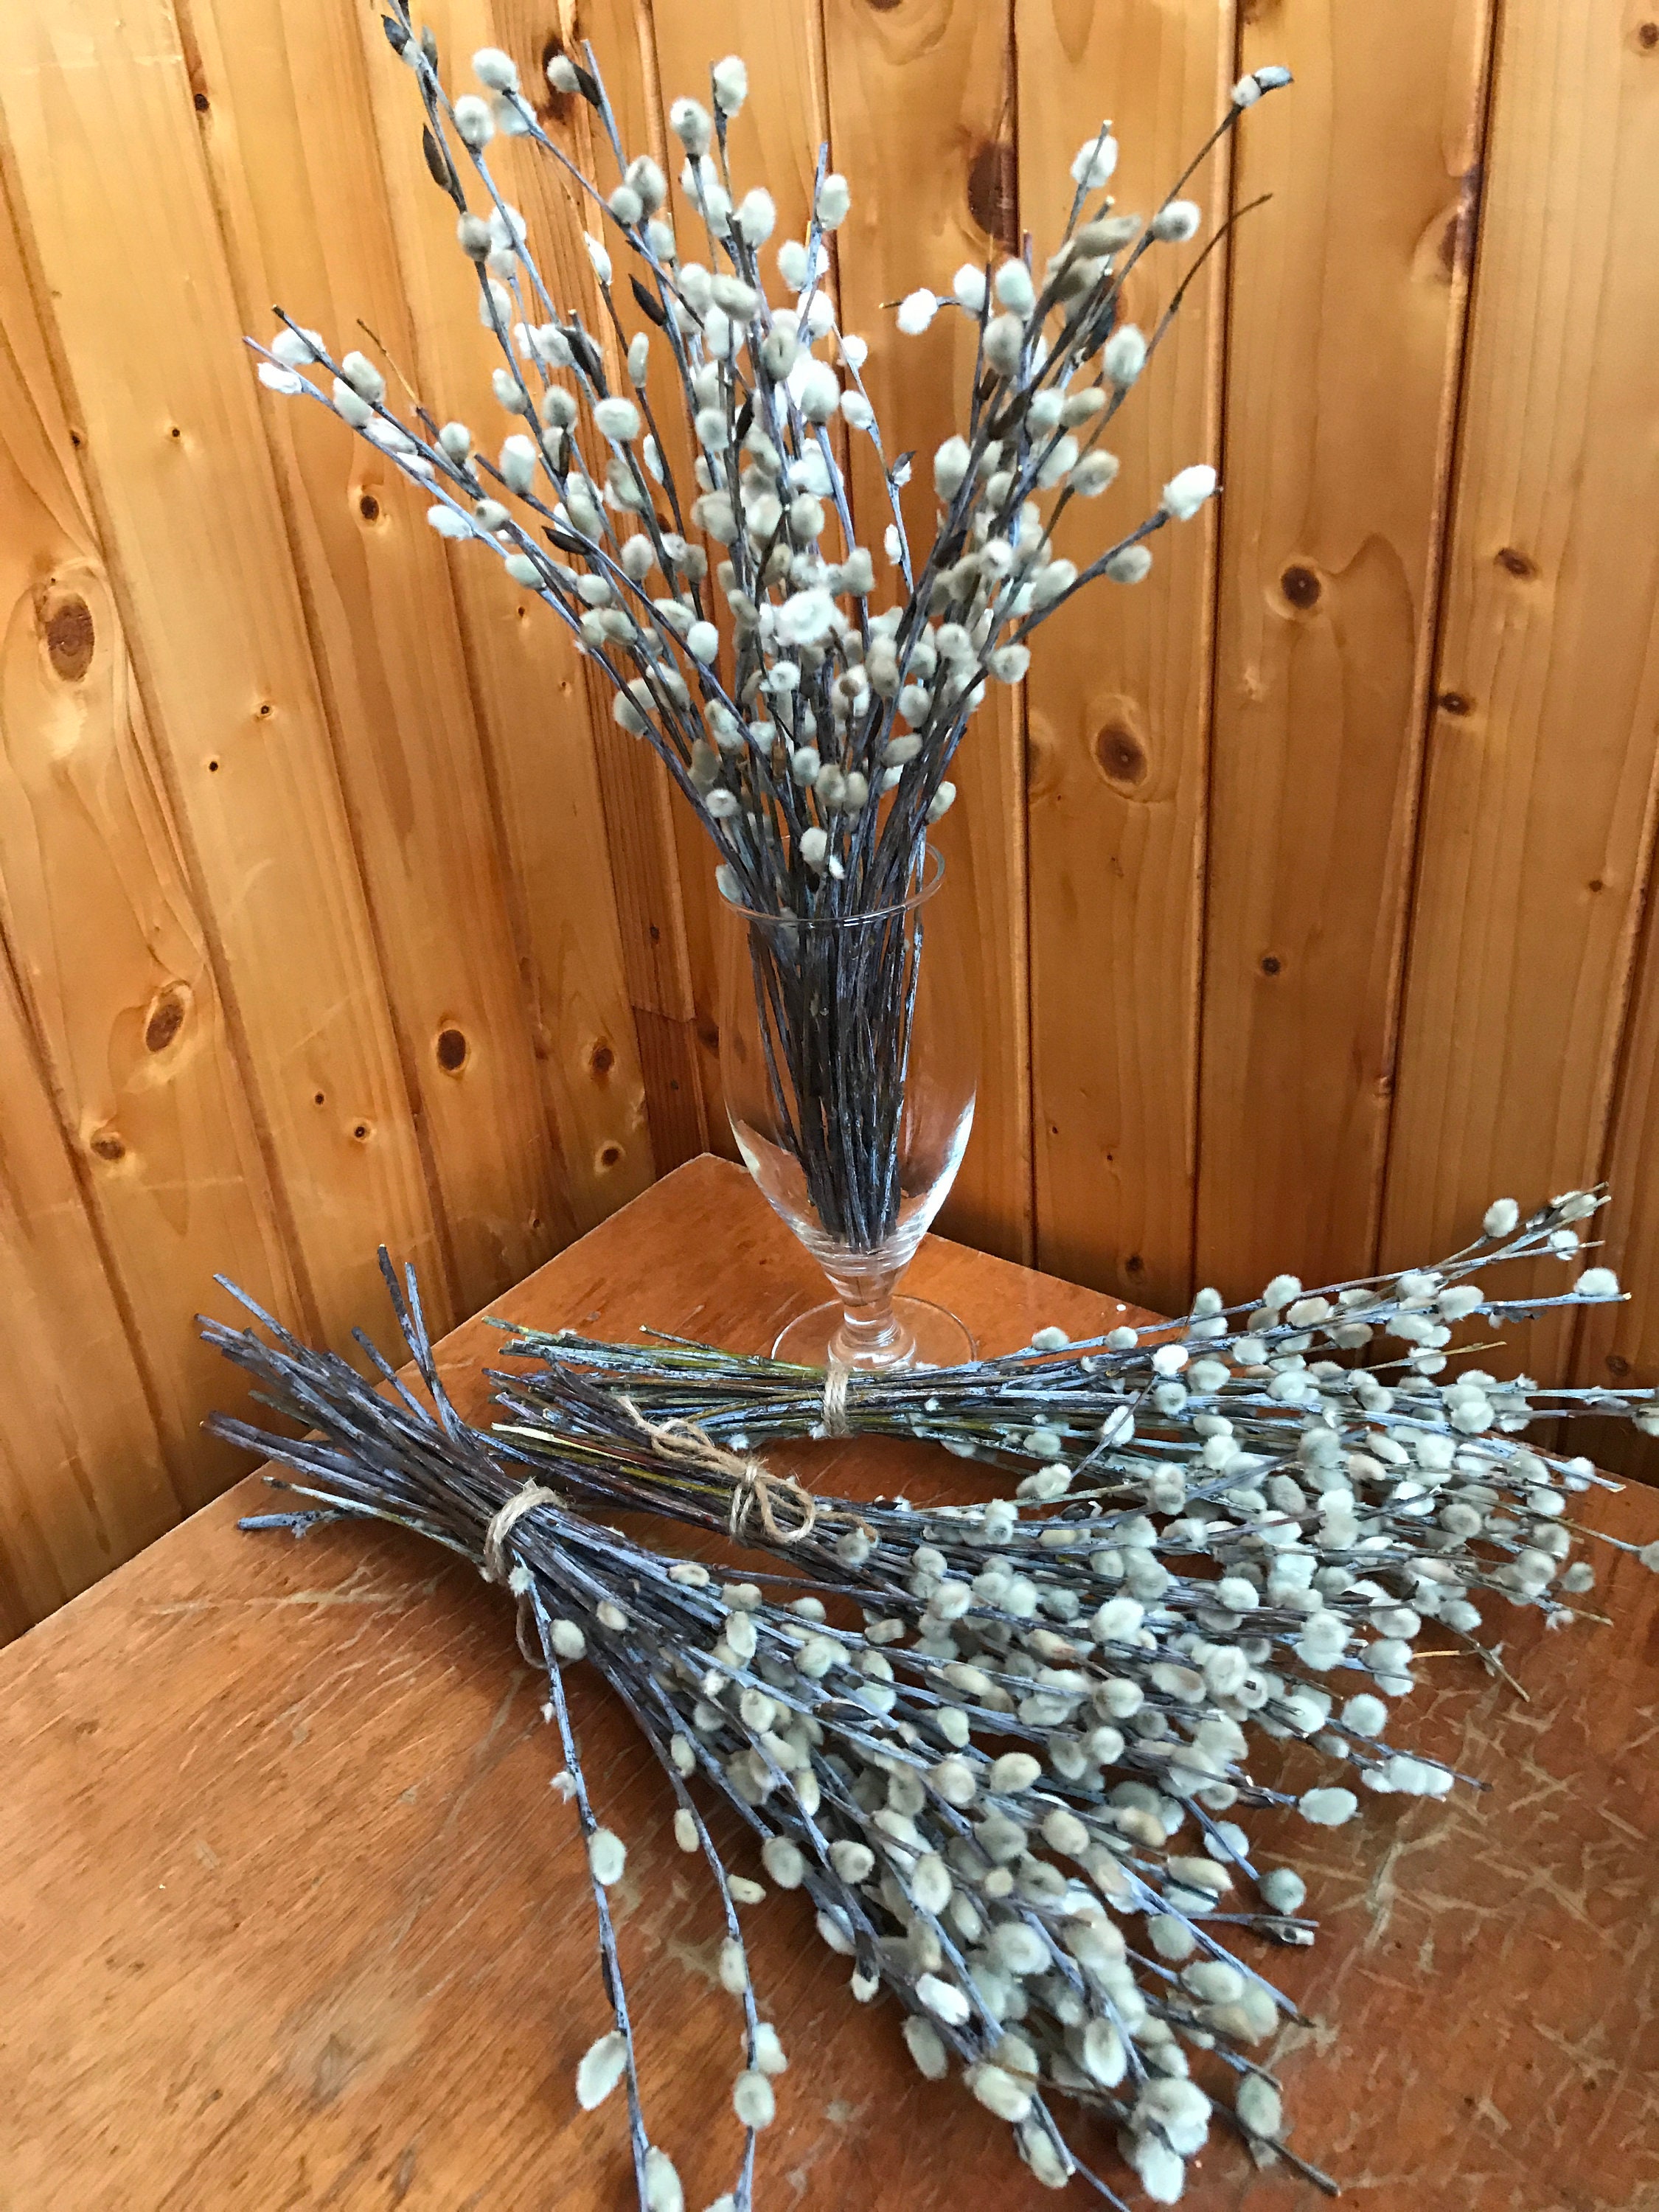 Aqumotic Artificial Pussy Willow Branches for Vases 1pc Tall Pussywillow in  Floor Vase Fake Twigs Espigas Para Decoracion Largas - AliExpress